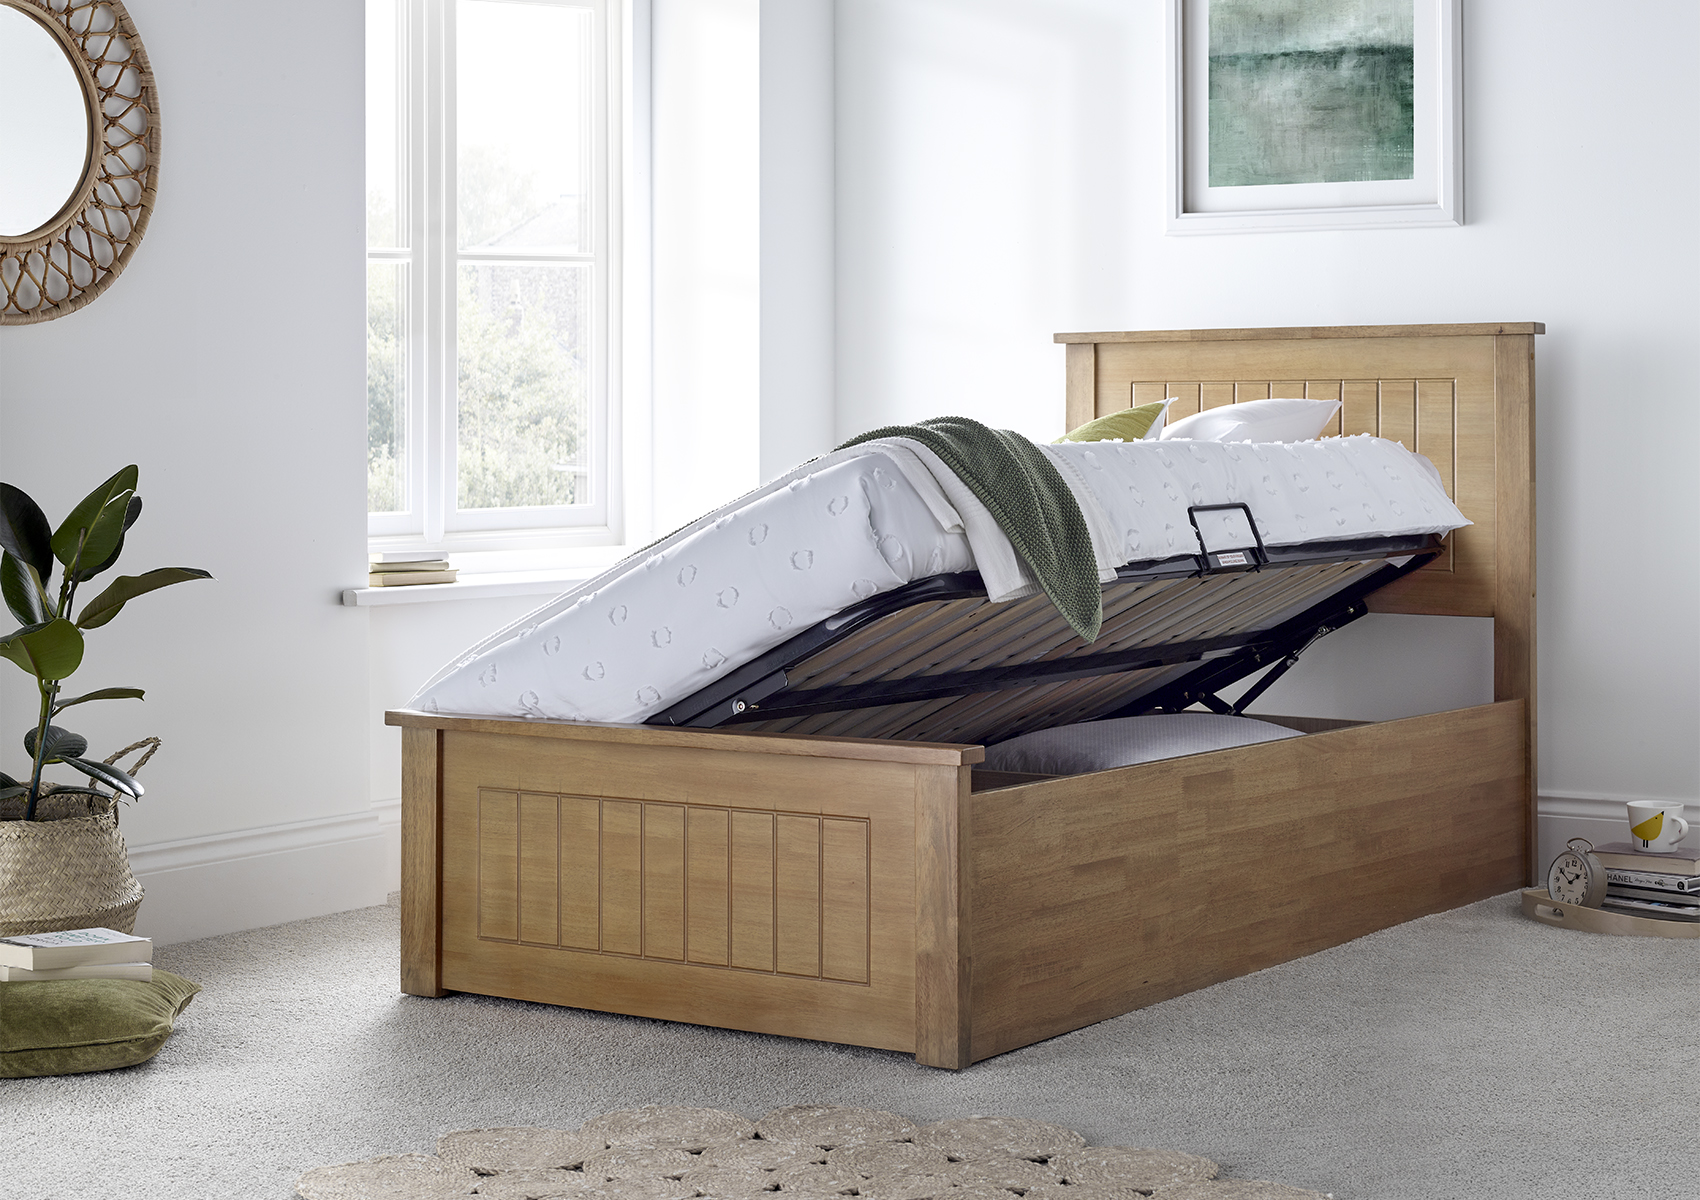 View New England Solo Oak Finish Wooden Ottoman Storage Bed Time4Sleep information